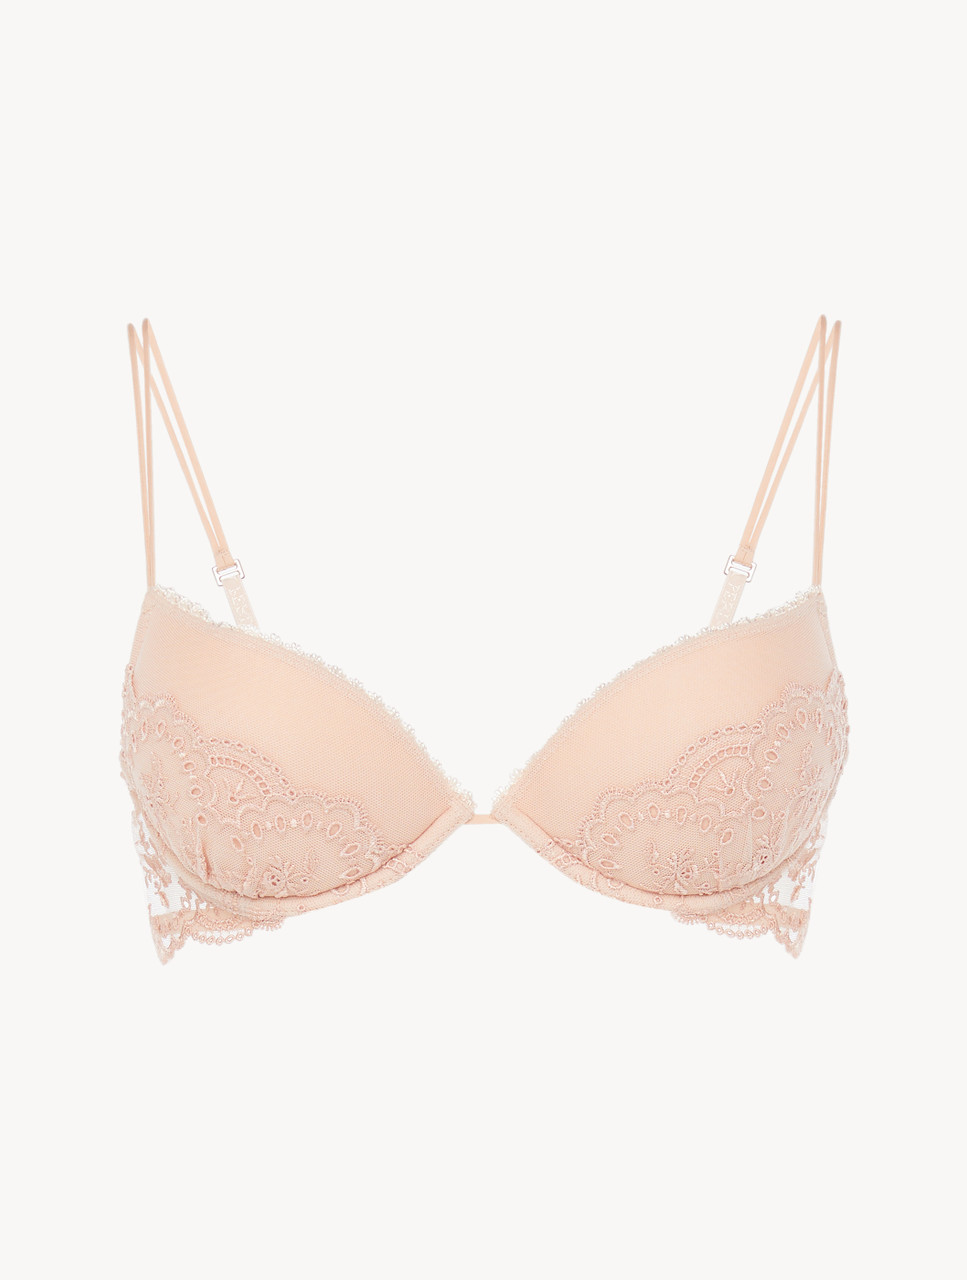 Push-up bra in earthy pink cotton